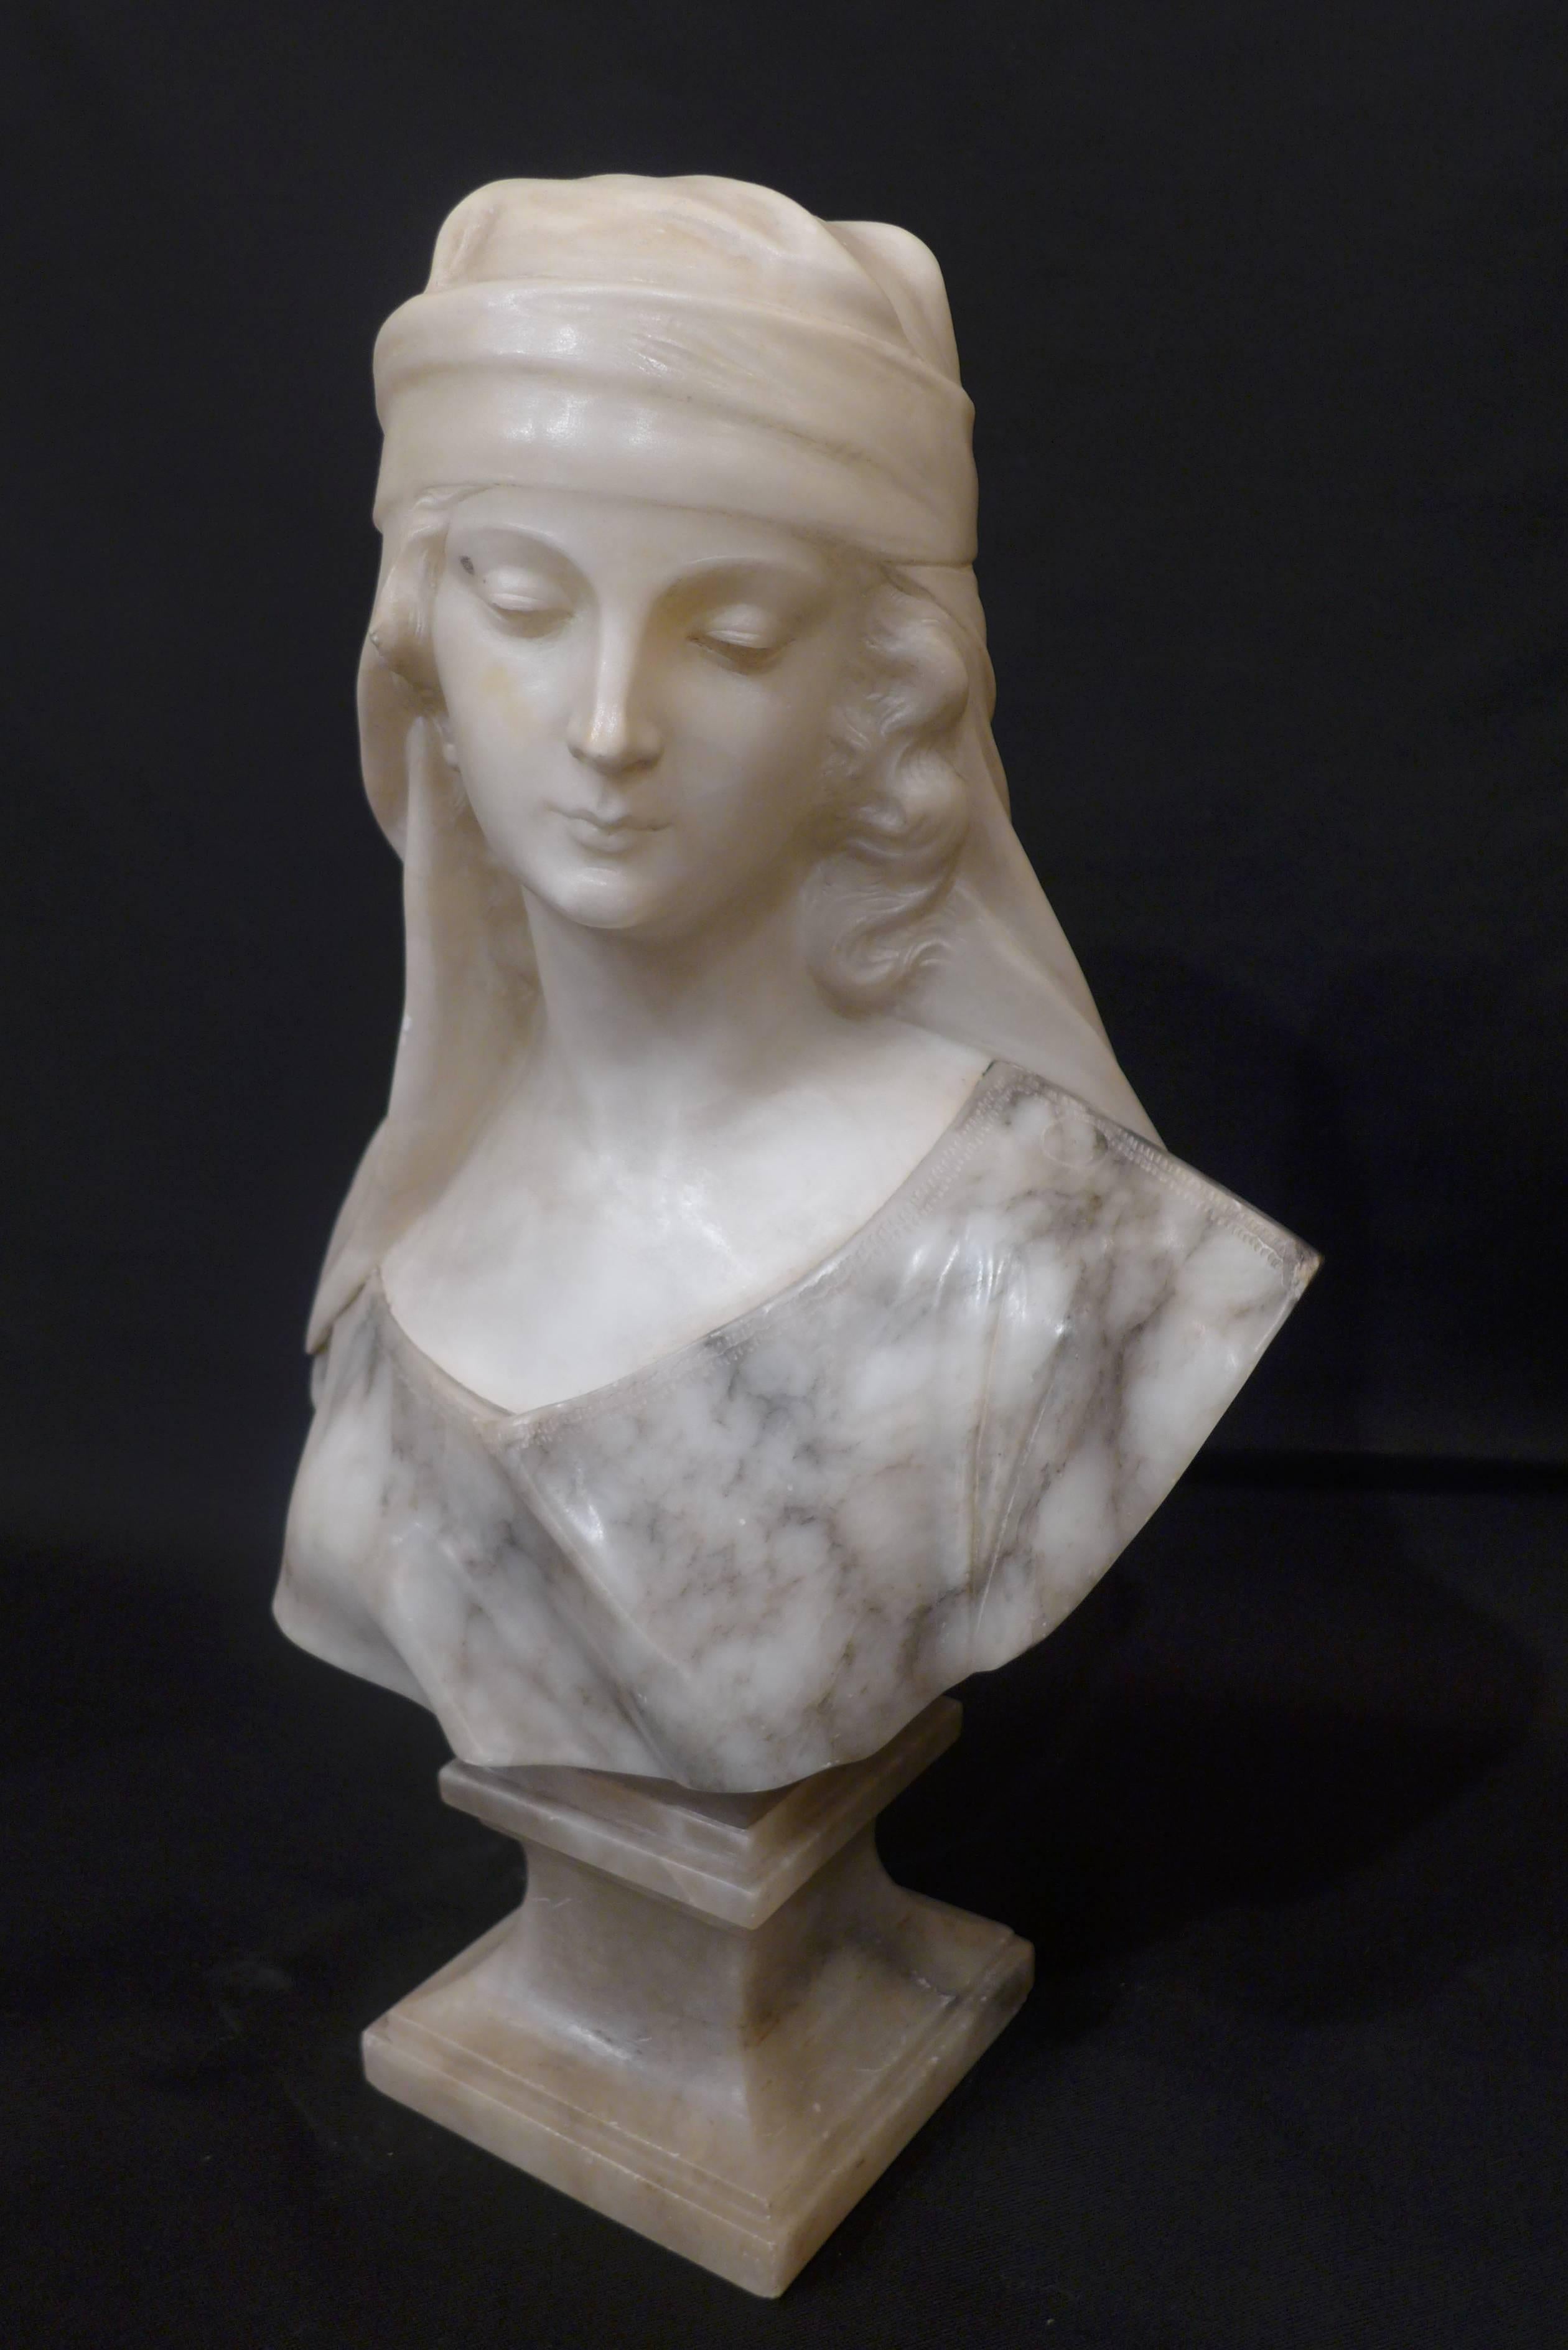 This sculpture represents an oriental woman bust, carved in alabaster, on a grey veined marble. 
It is signed on the back by the artist Guglielmo Pugi (1850-1915), born in Fiesole, a small town close to Florence.

Guglielmo Pugi carved the bust